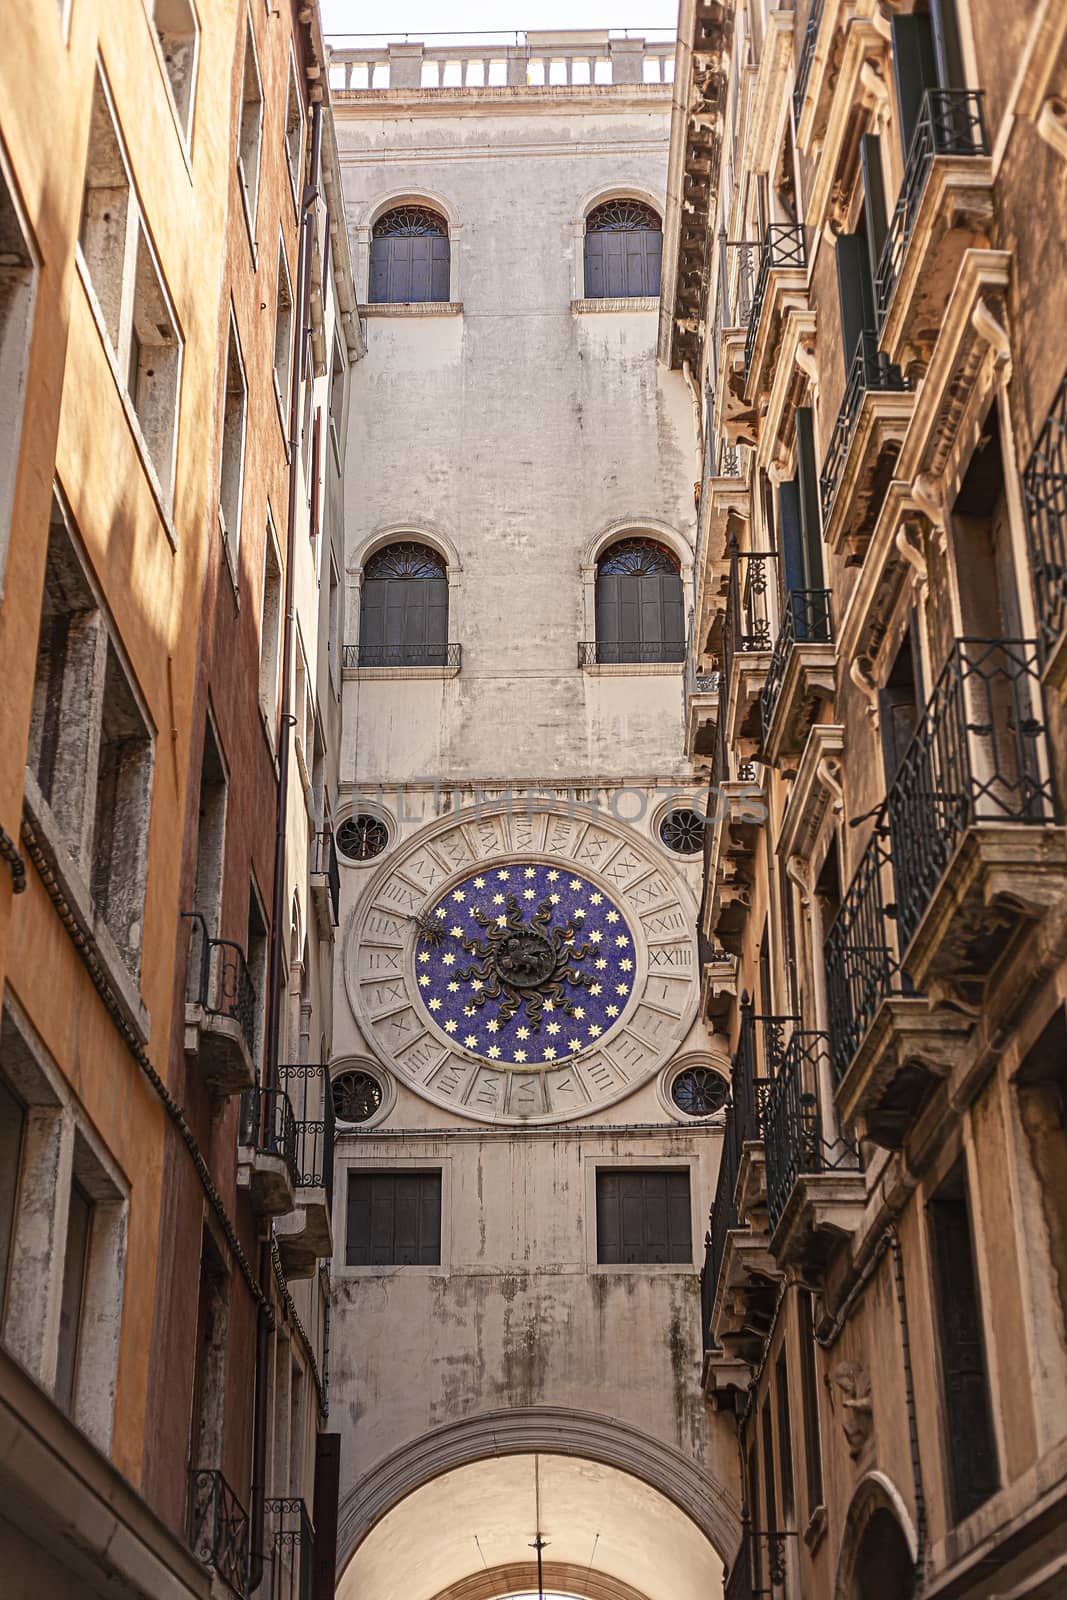 Clock tower detail in Venice, in Italy an example of Renaissance architecture